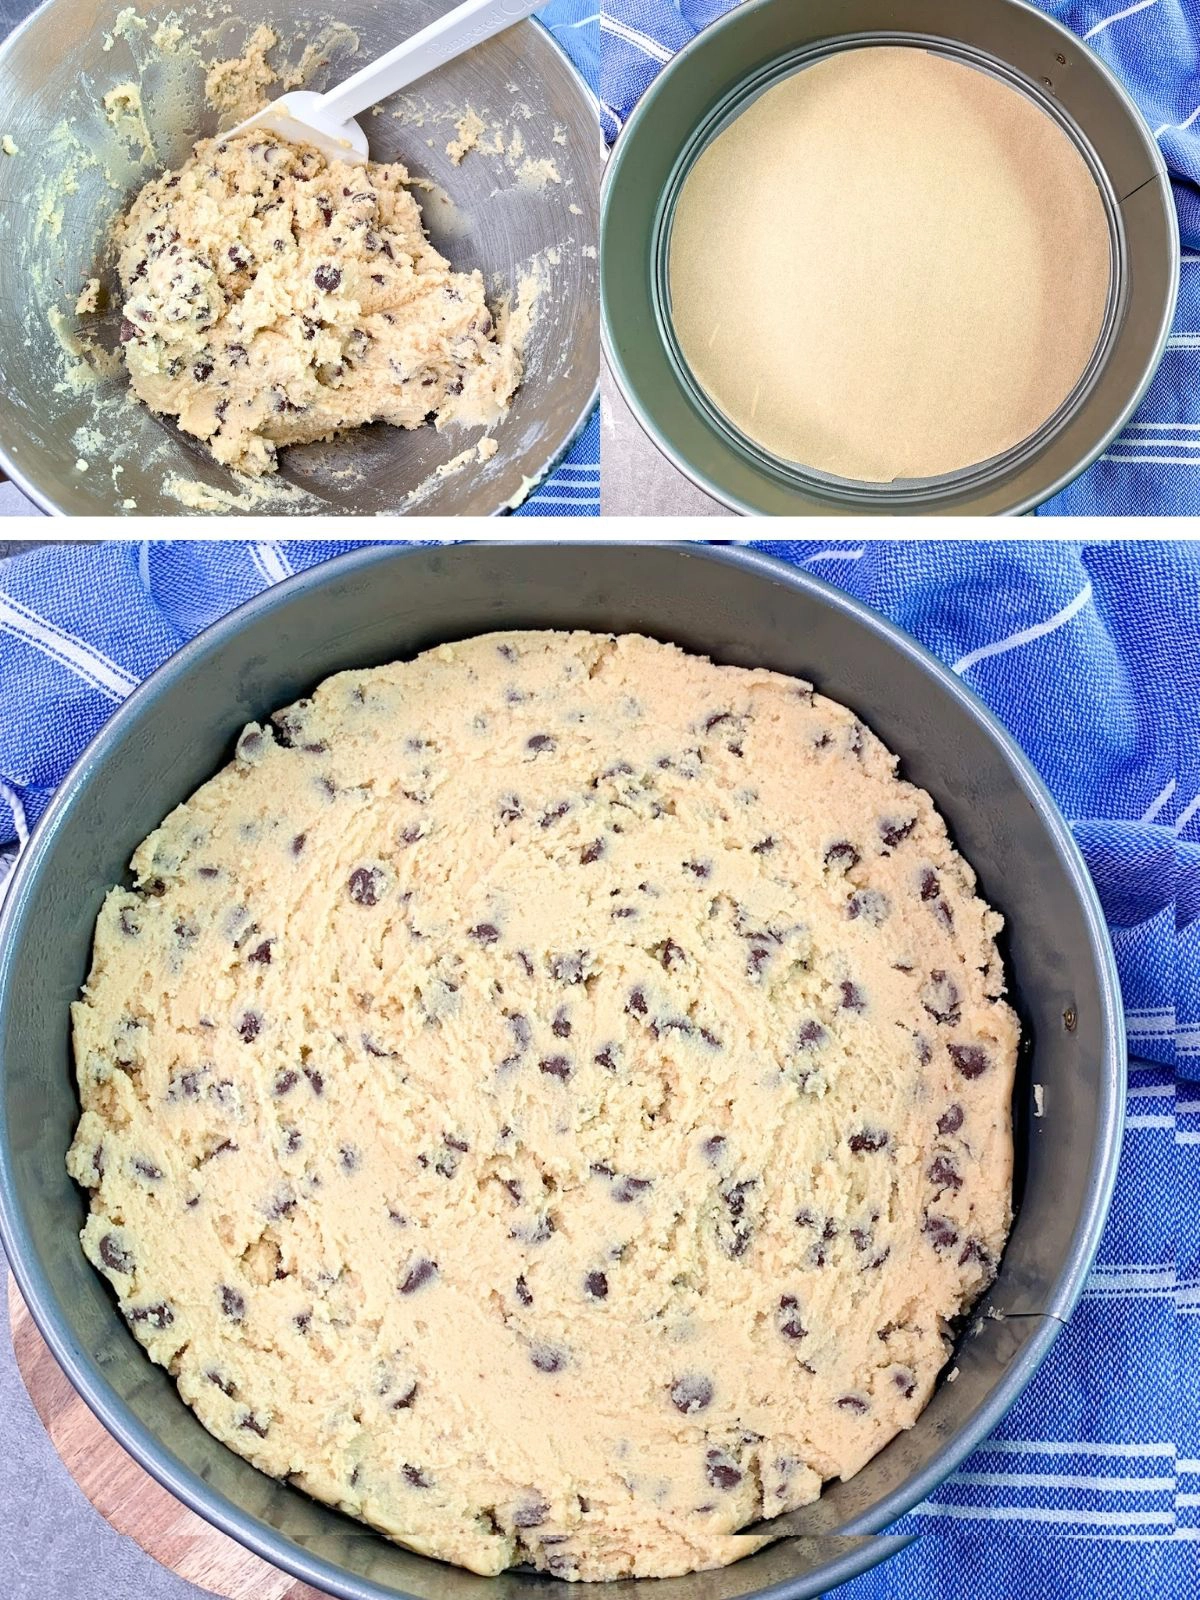 Chocolate Chip Cookie Dough in baking pan.